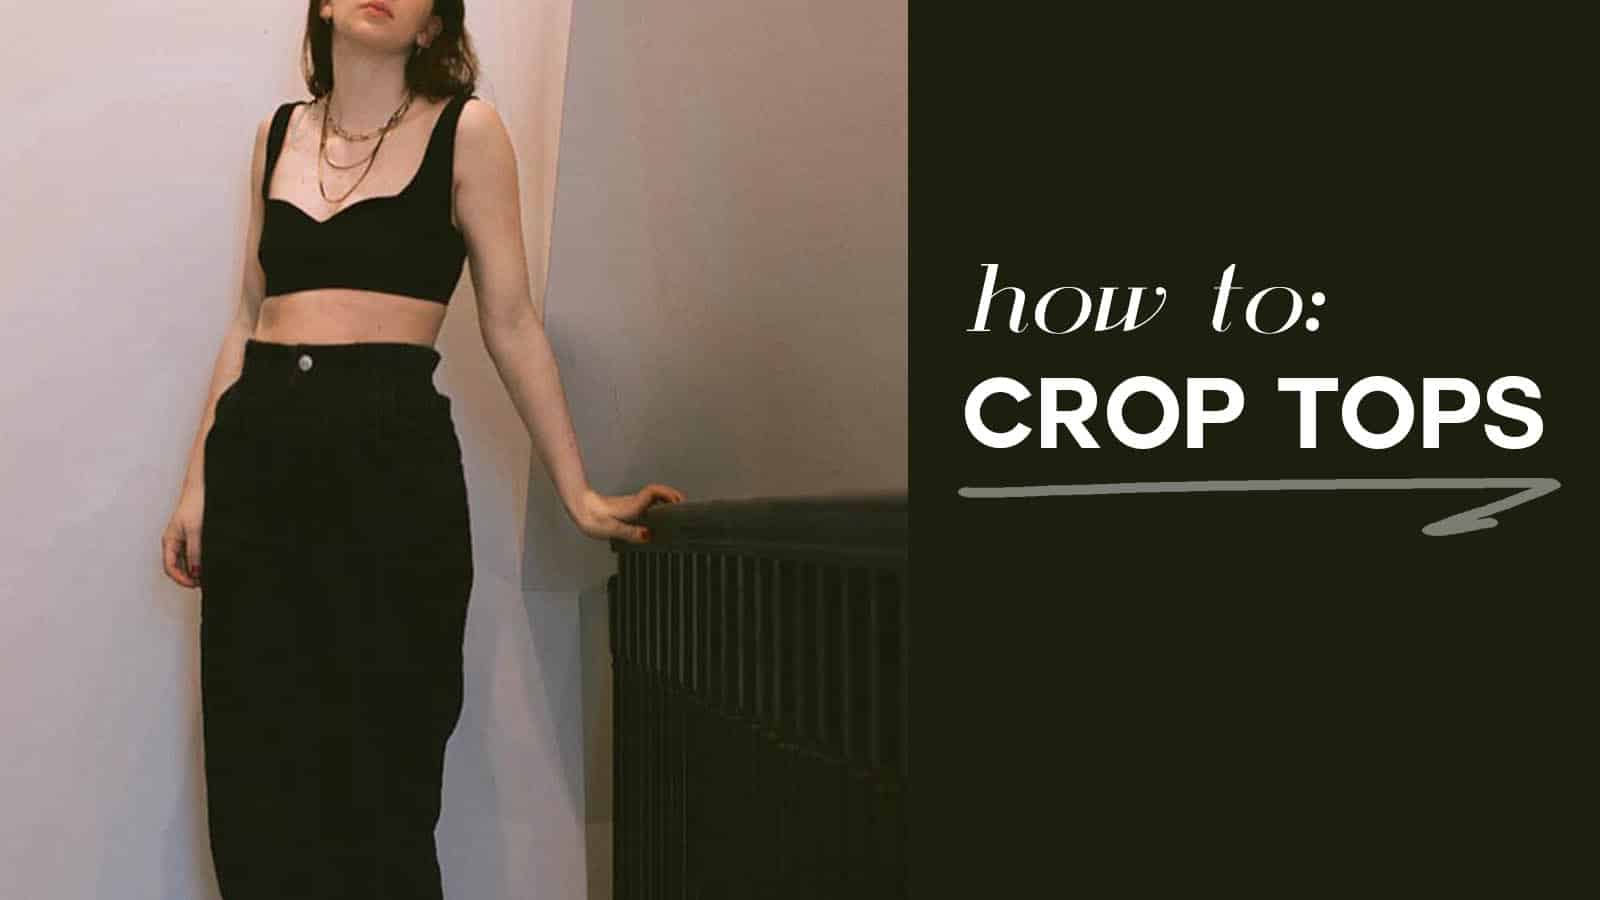 Crop Tops, yay or nay? Read this first.